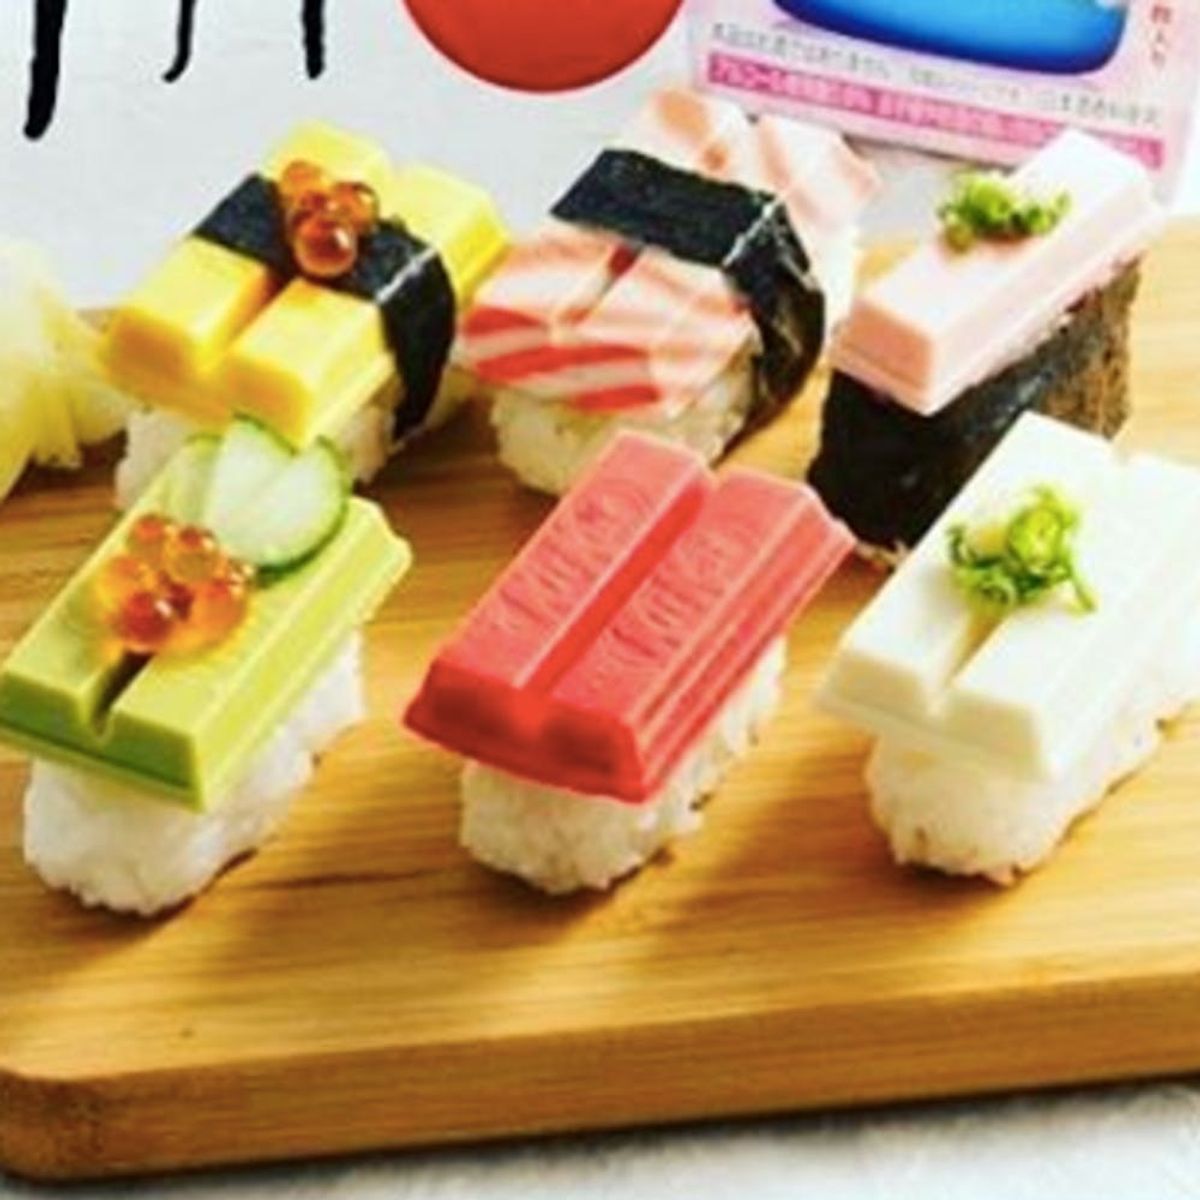 Kit Kat Sushi Is Now a Thing and We Need to Try It ASAP